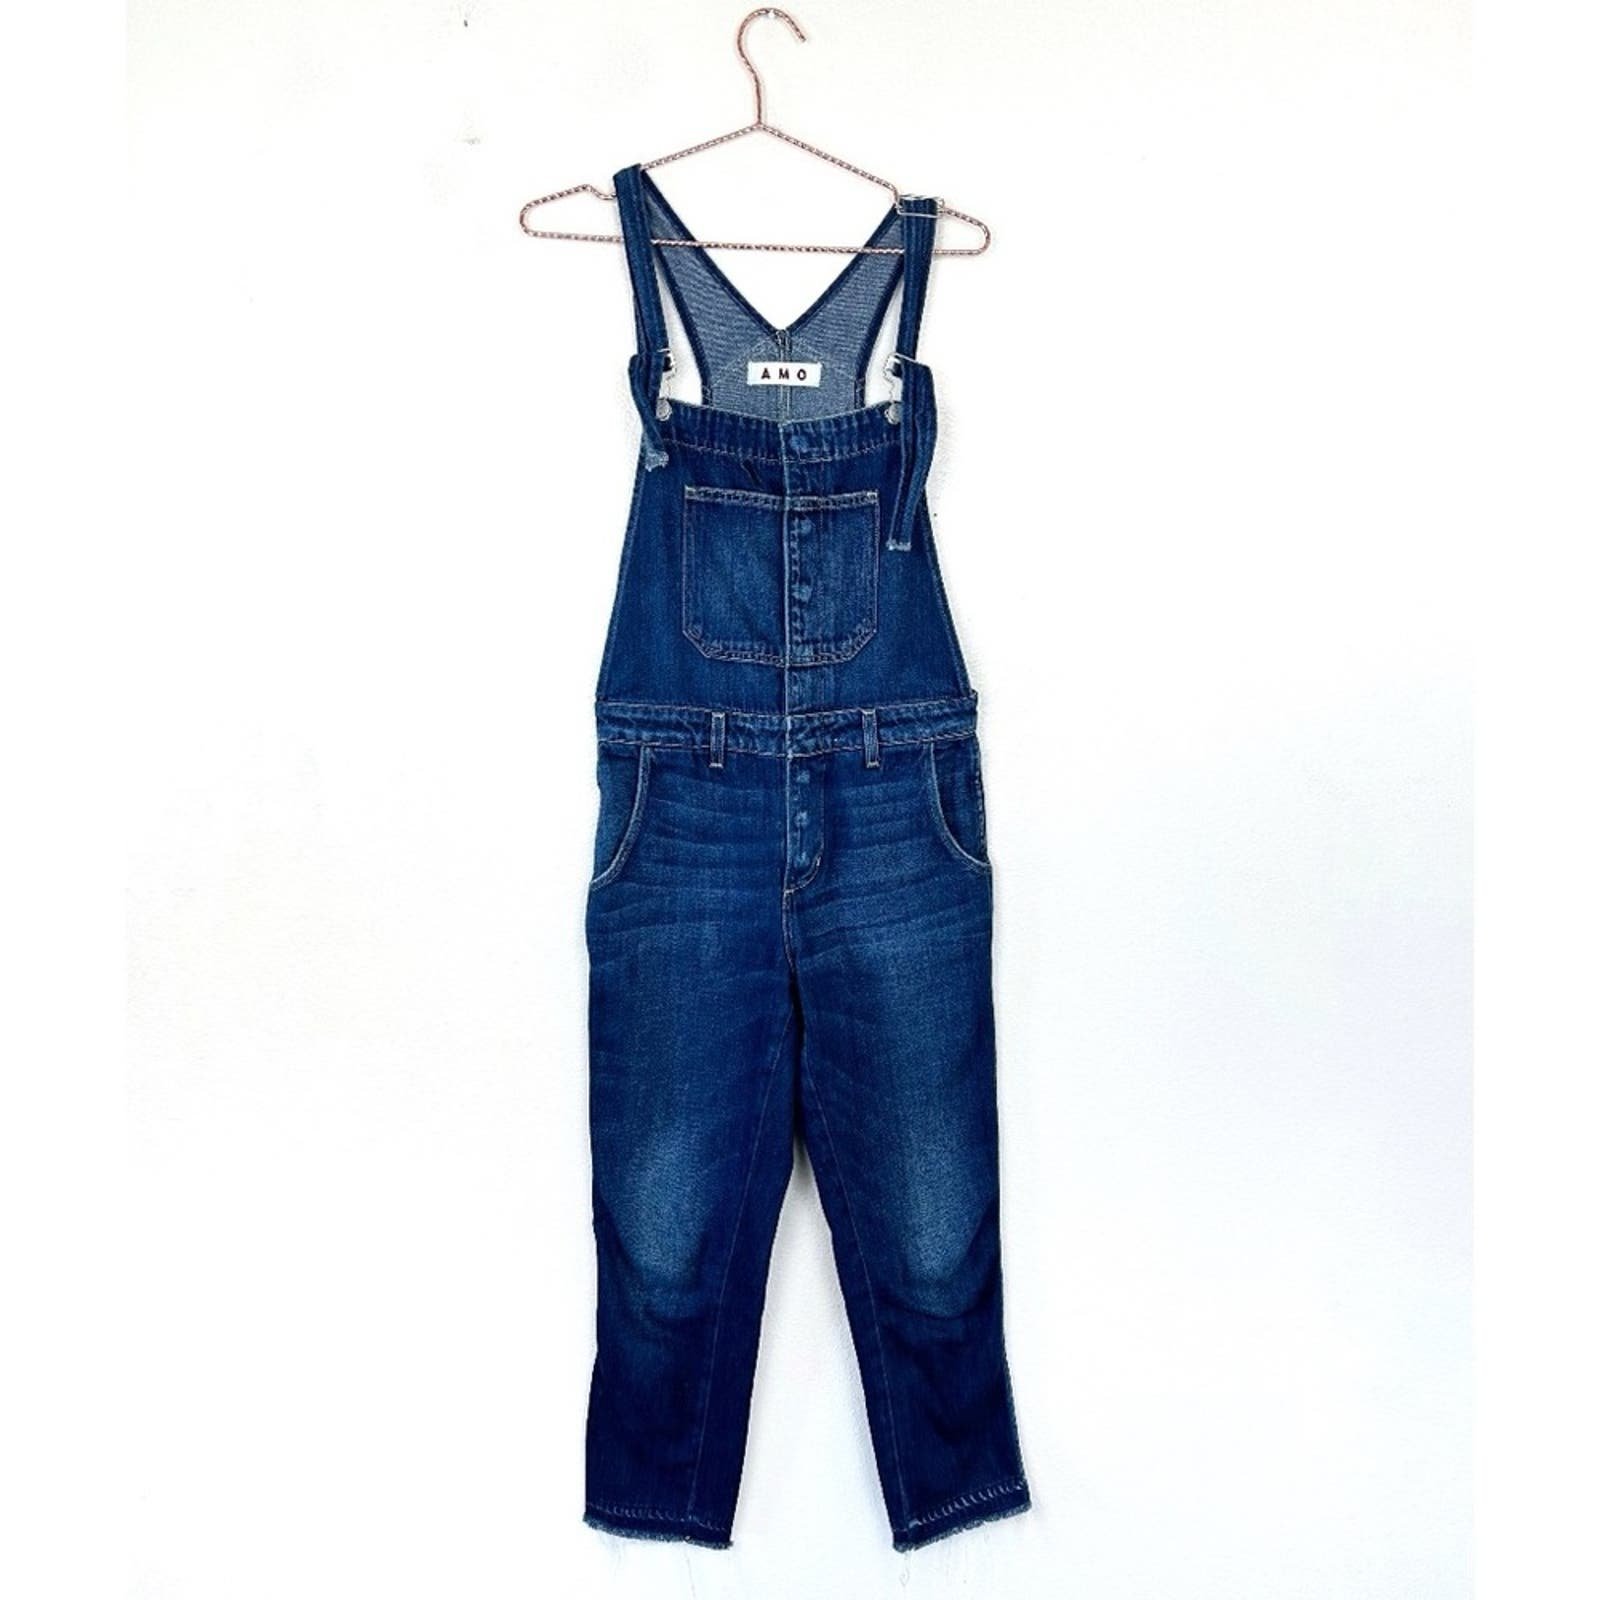 floor price AMO Babe Denim Cotton Overalls in True Blue pIGk9CCYn just for you